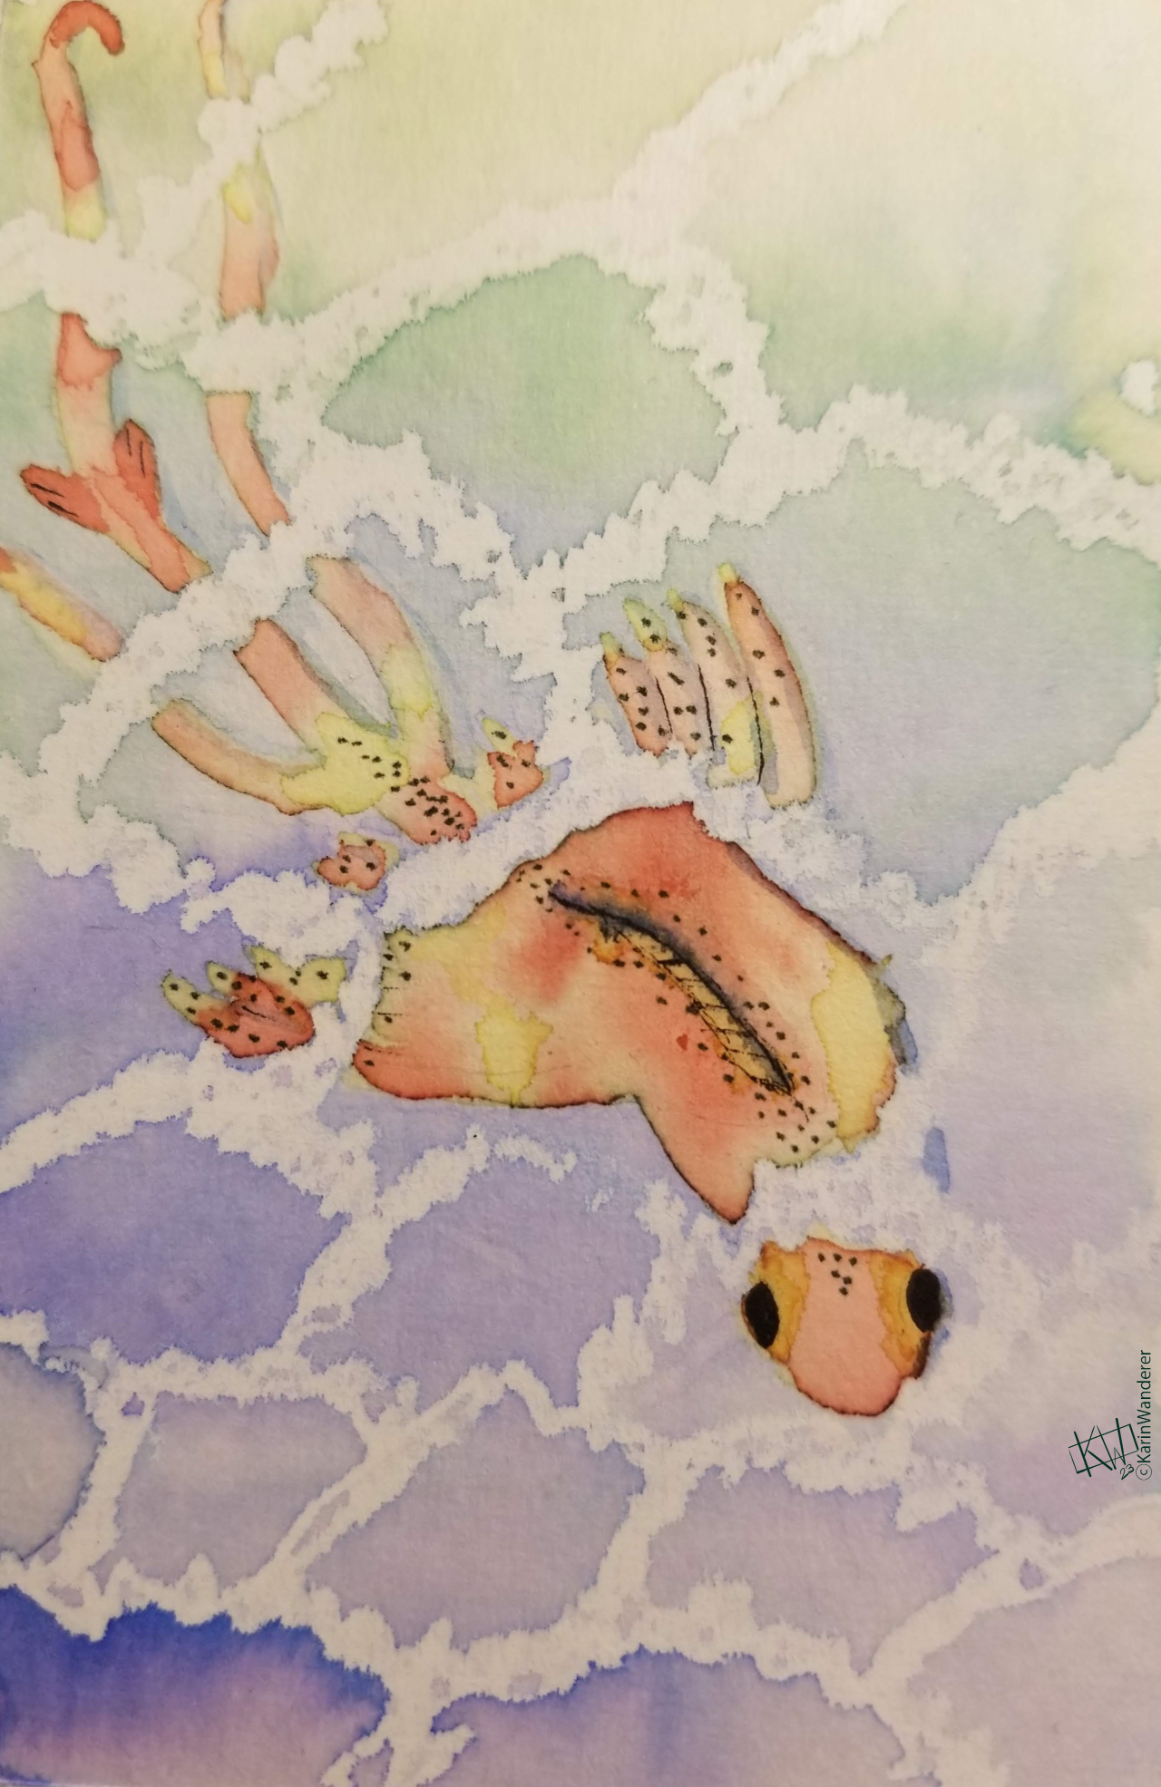 Watercolor of a yellow-orange-red fishlike animal with grey speckles down its back & on it fins. It has large black eyes & 3 tails. Caustic patterns cover the surface of the blue-green water it swims through.